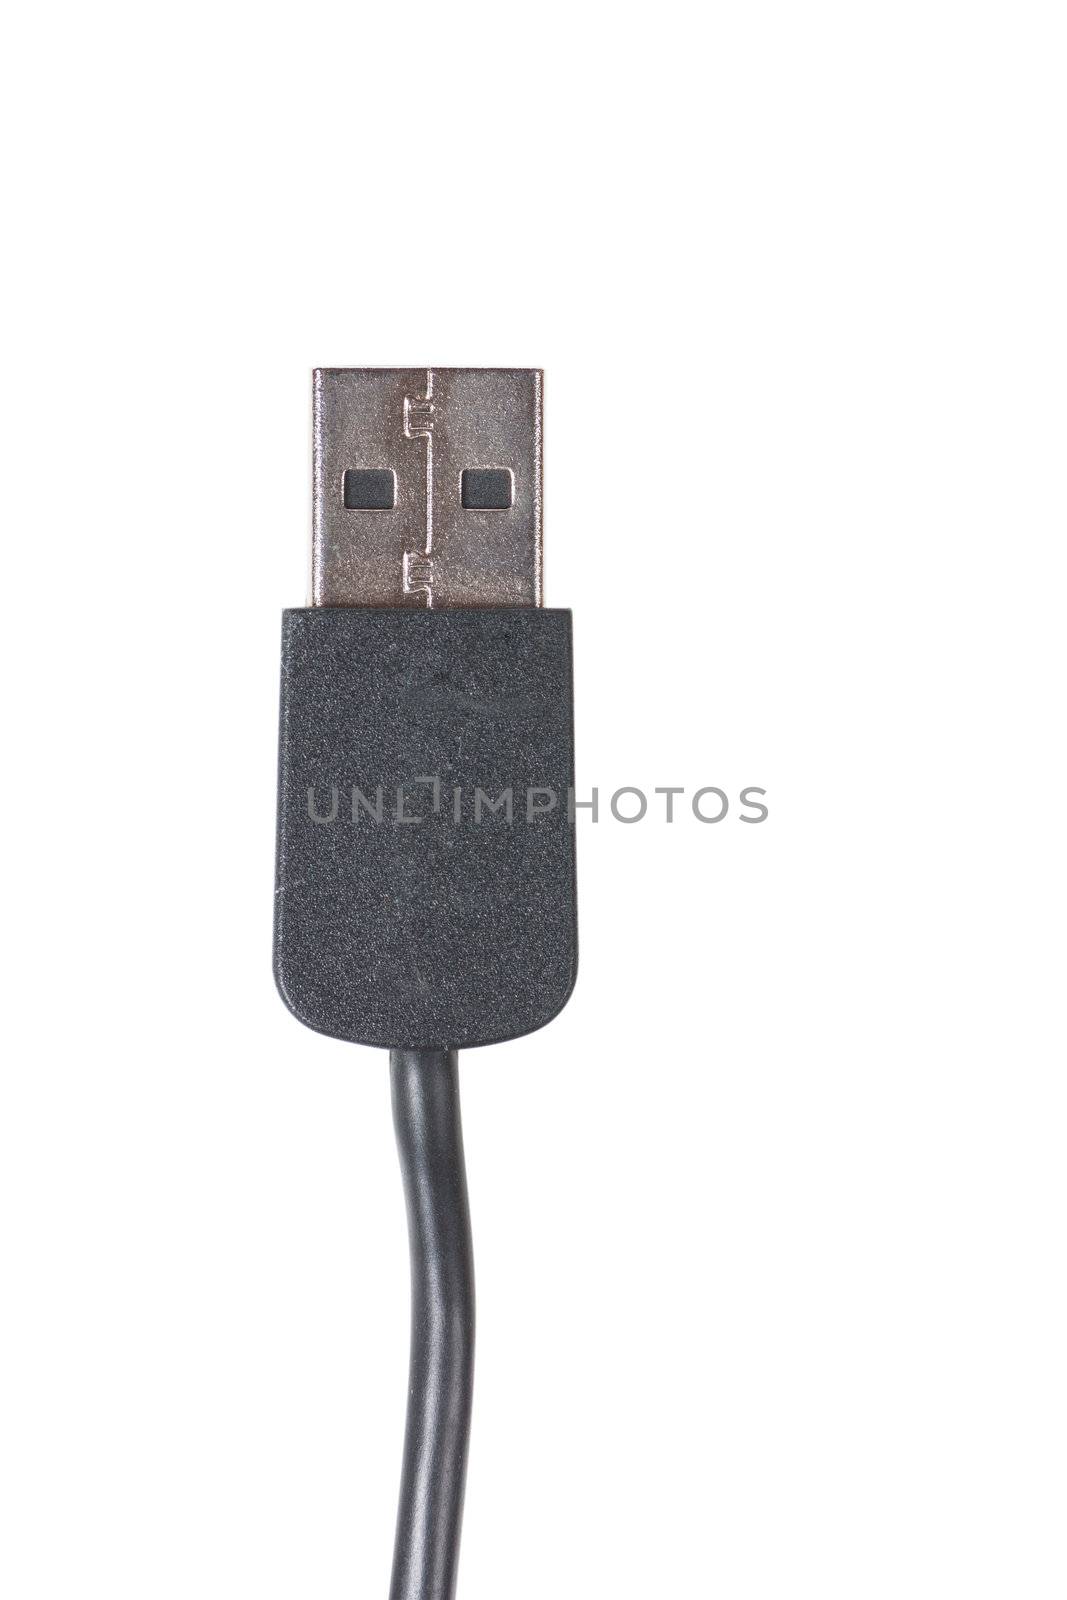 Usb cable plug over the white background